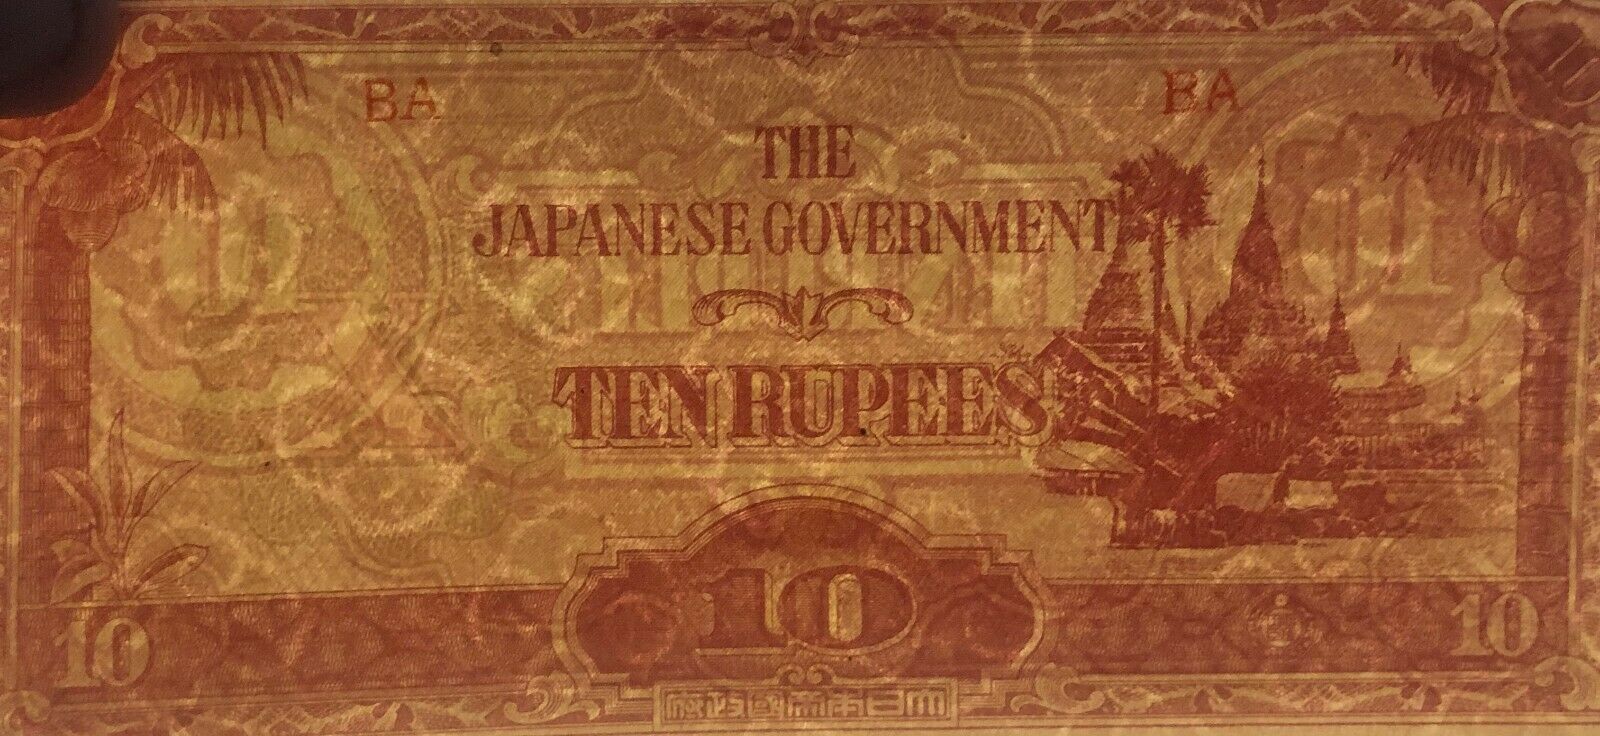 BURMA JAPAN INVASION 10 RUPEES WATERMARK BUT NO THREADS SCHWAN BOLING # 2157a